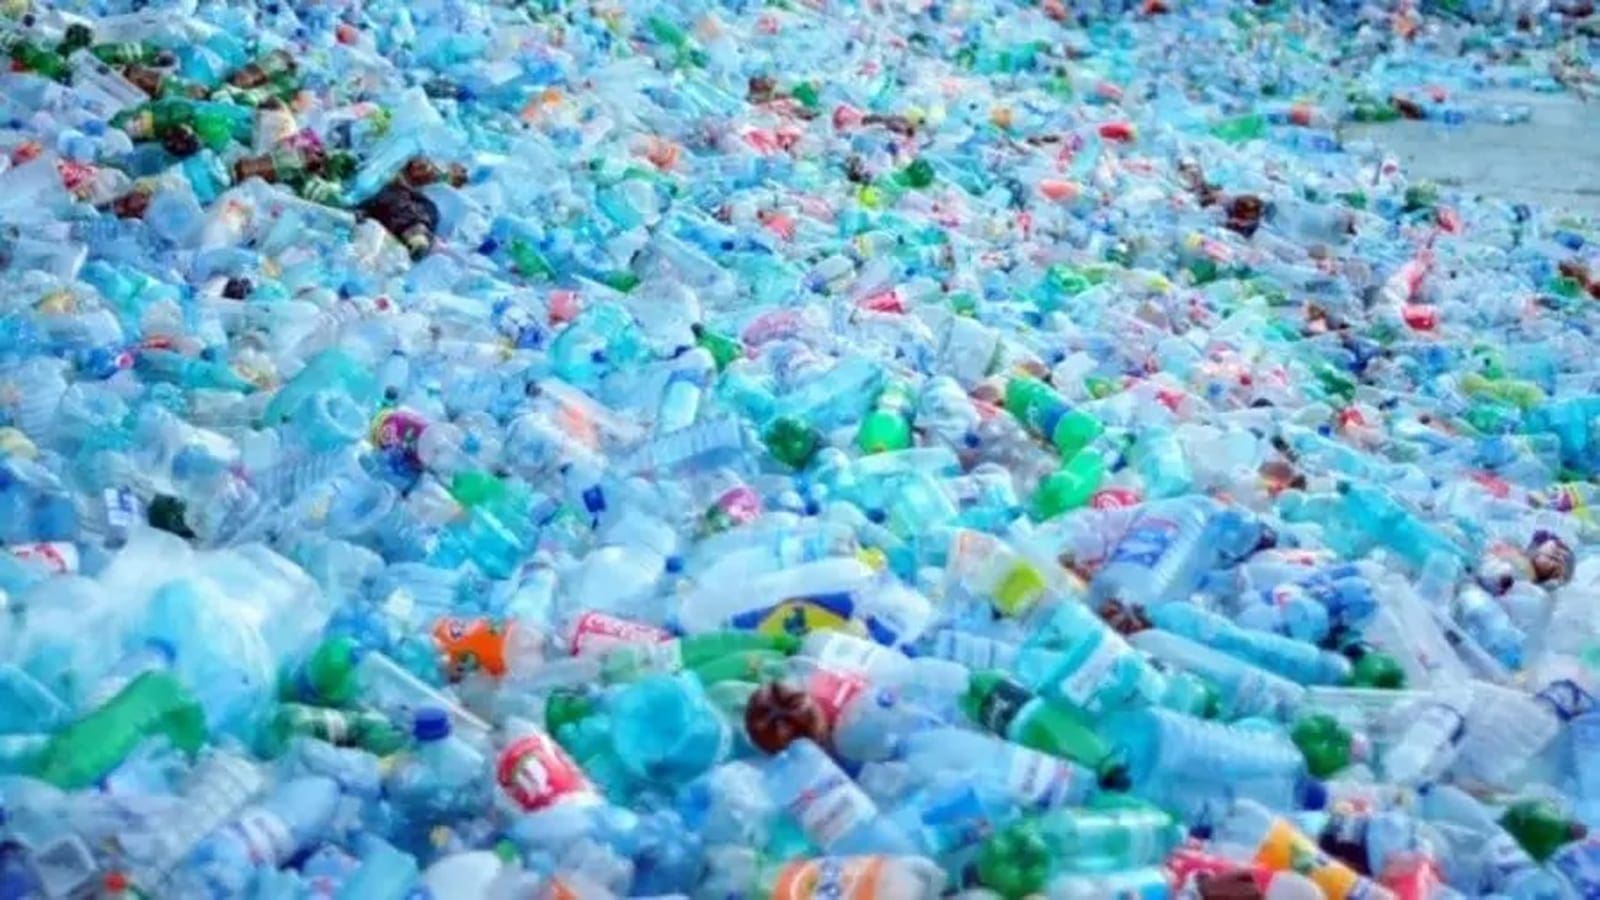 Government of Nigeria, Japan, UNIDO launch US$2.8m sustainable plastic value chains project